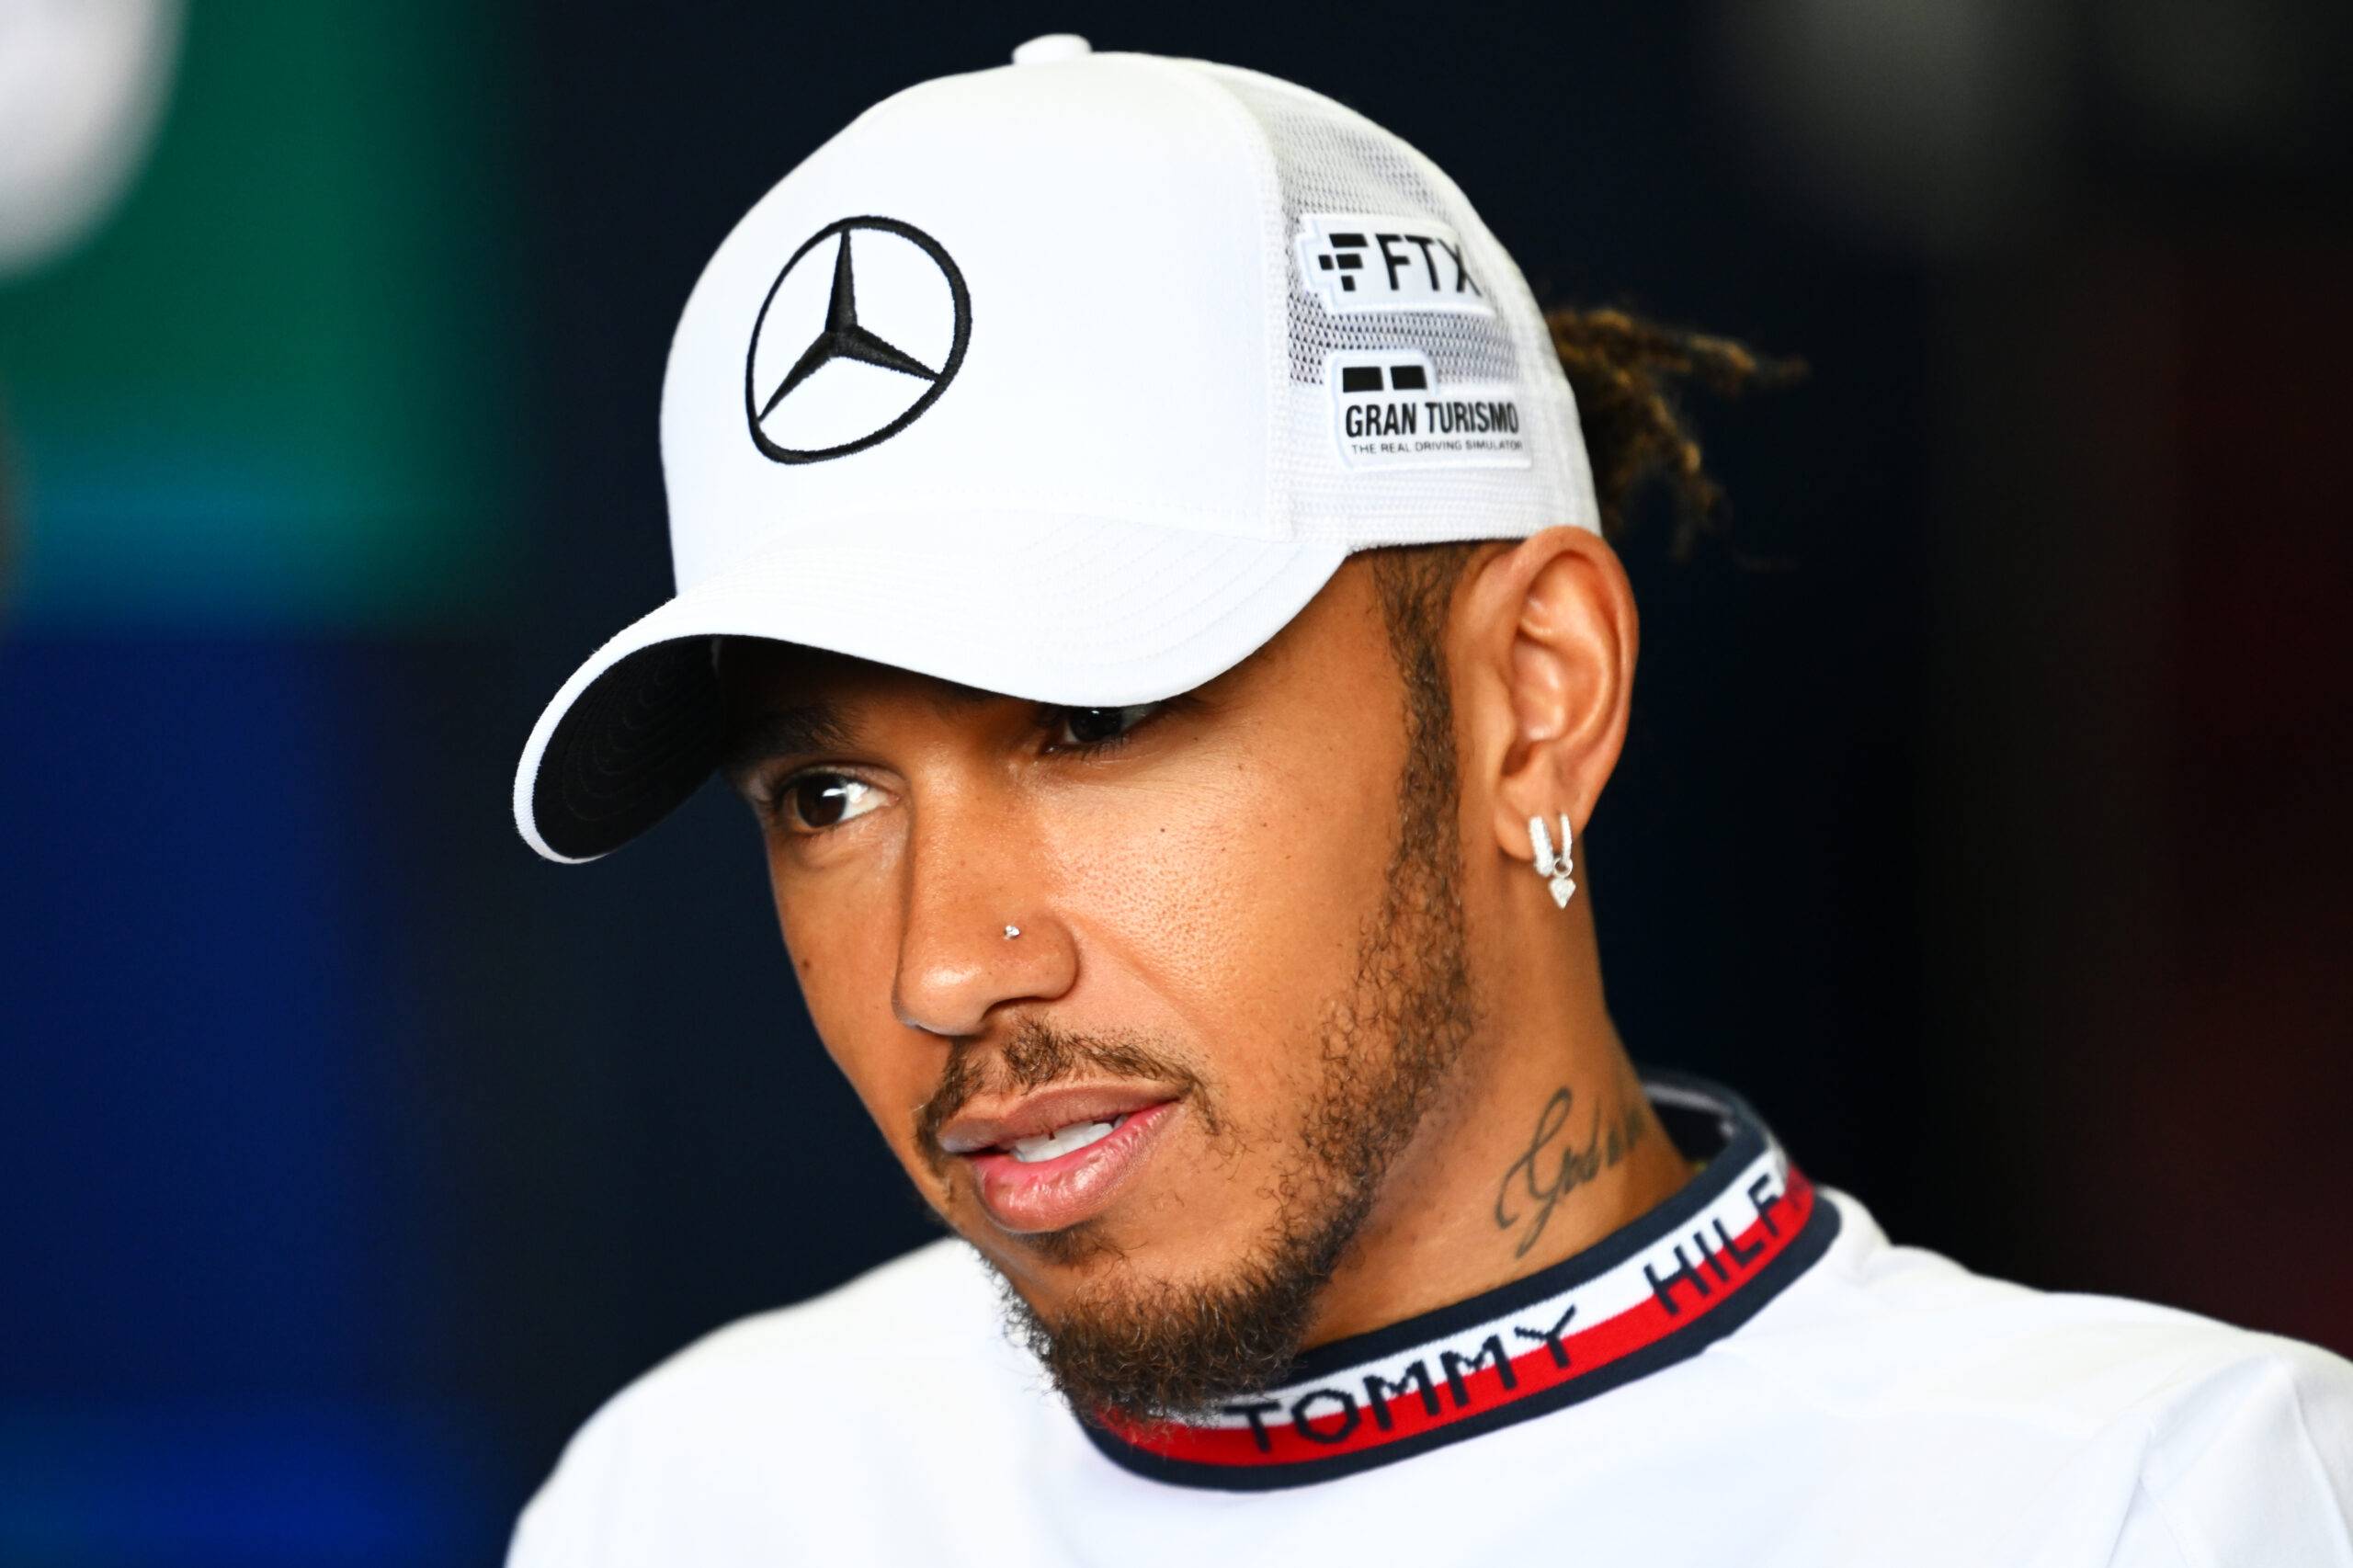 Lewis Hamilton speaks to the press before the Japanese Grand Prix